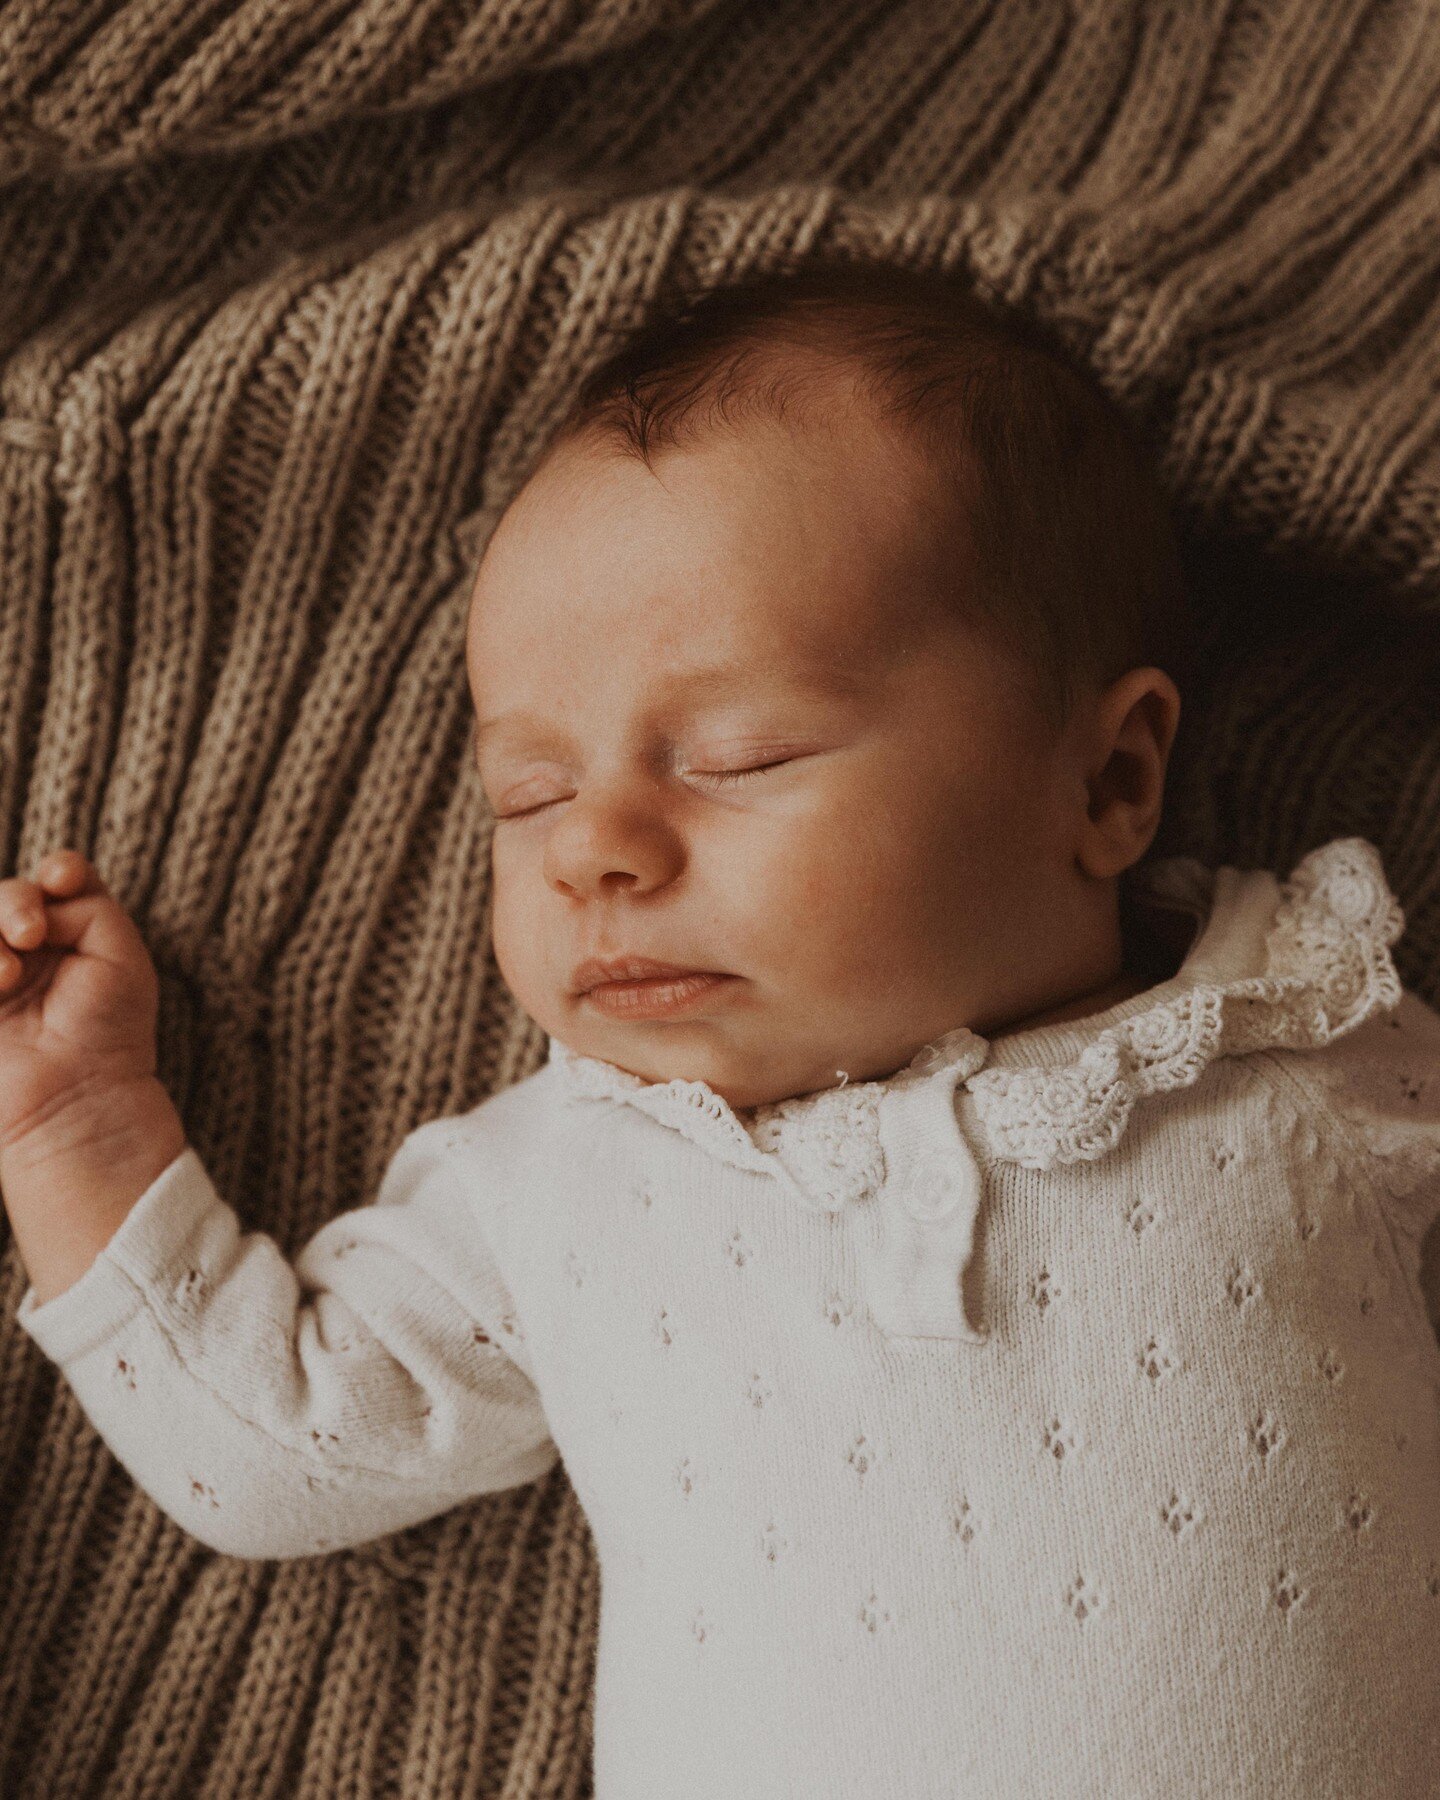 At-home newborn sessions make my heart so happy. I just love them so much. 
.
.
.
#newbornphotographersydney #newbornphotographysydney #newbornphotography #newbornphotoshoot #lifestylephotographersydney #lifestylephotography #athomenewbornsession #sy